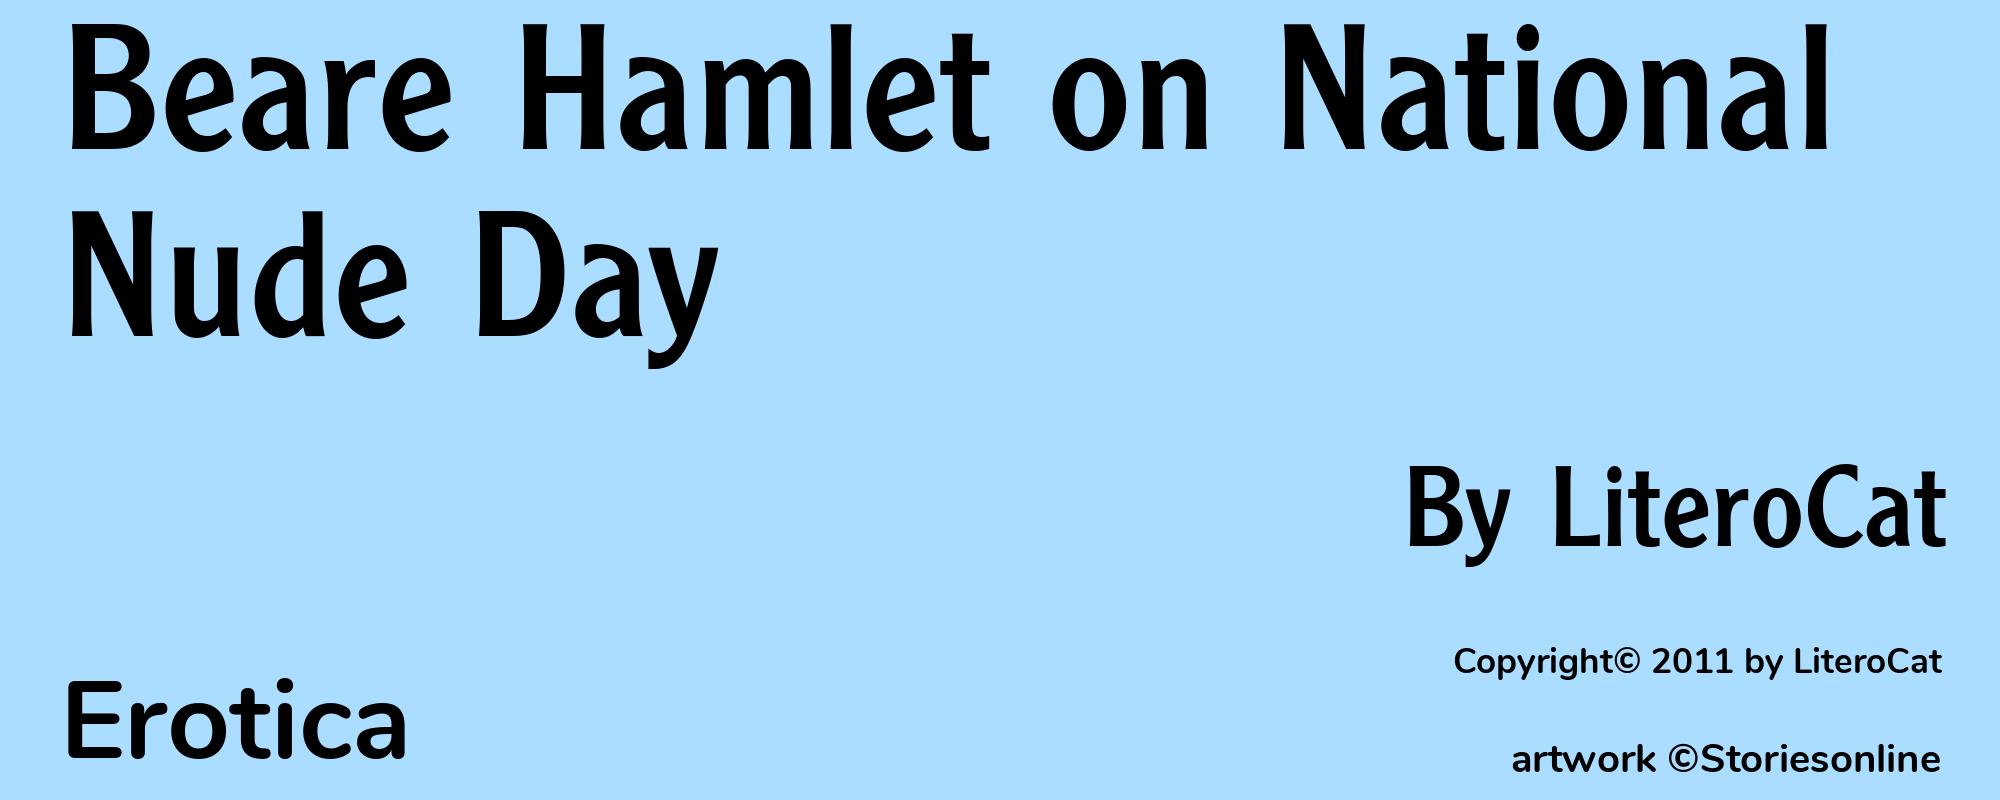 Beare Hamlet on National Nude Day - Cover